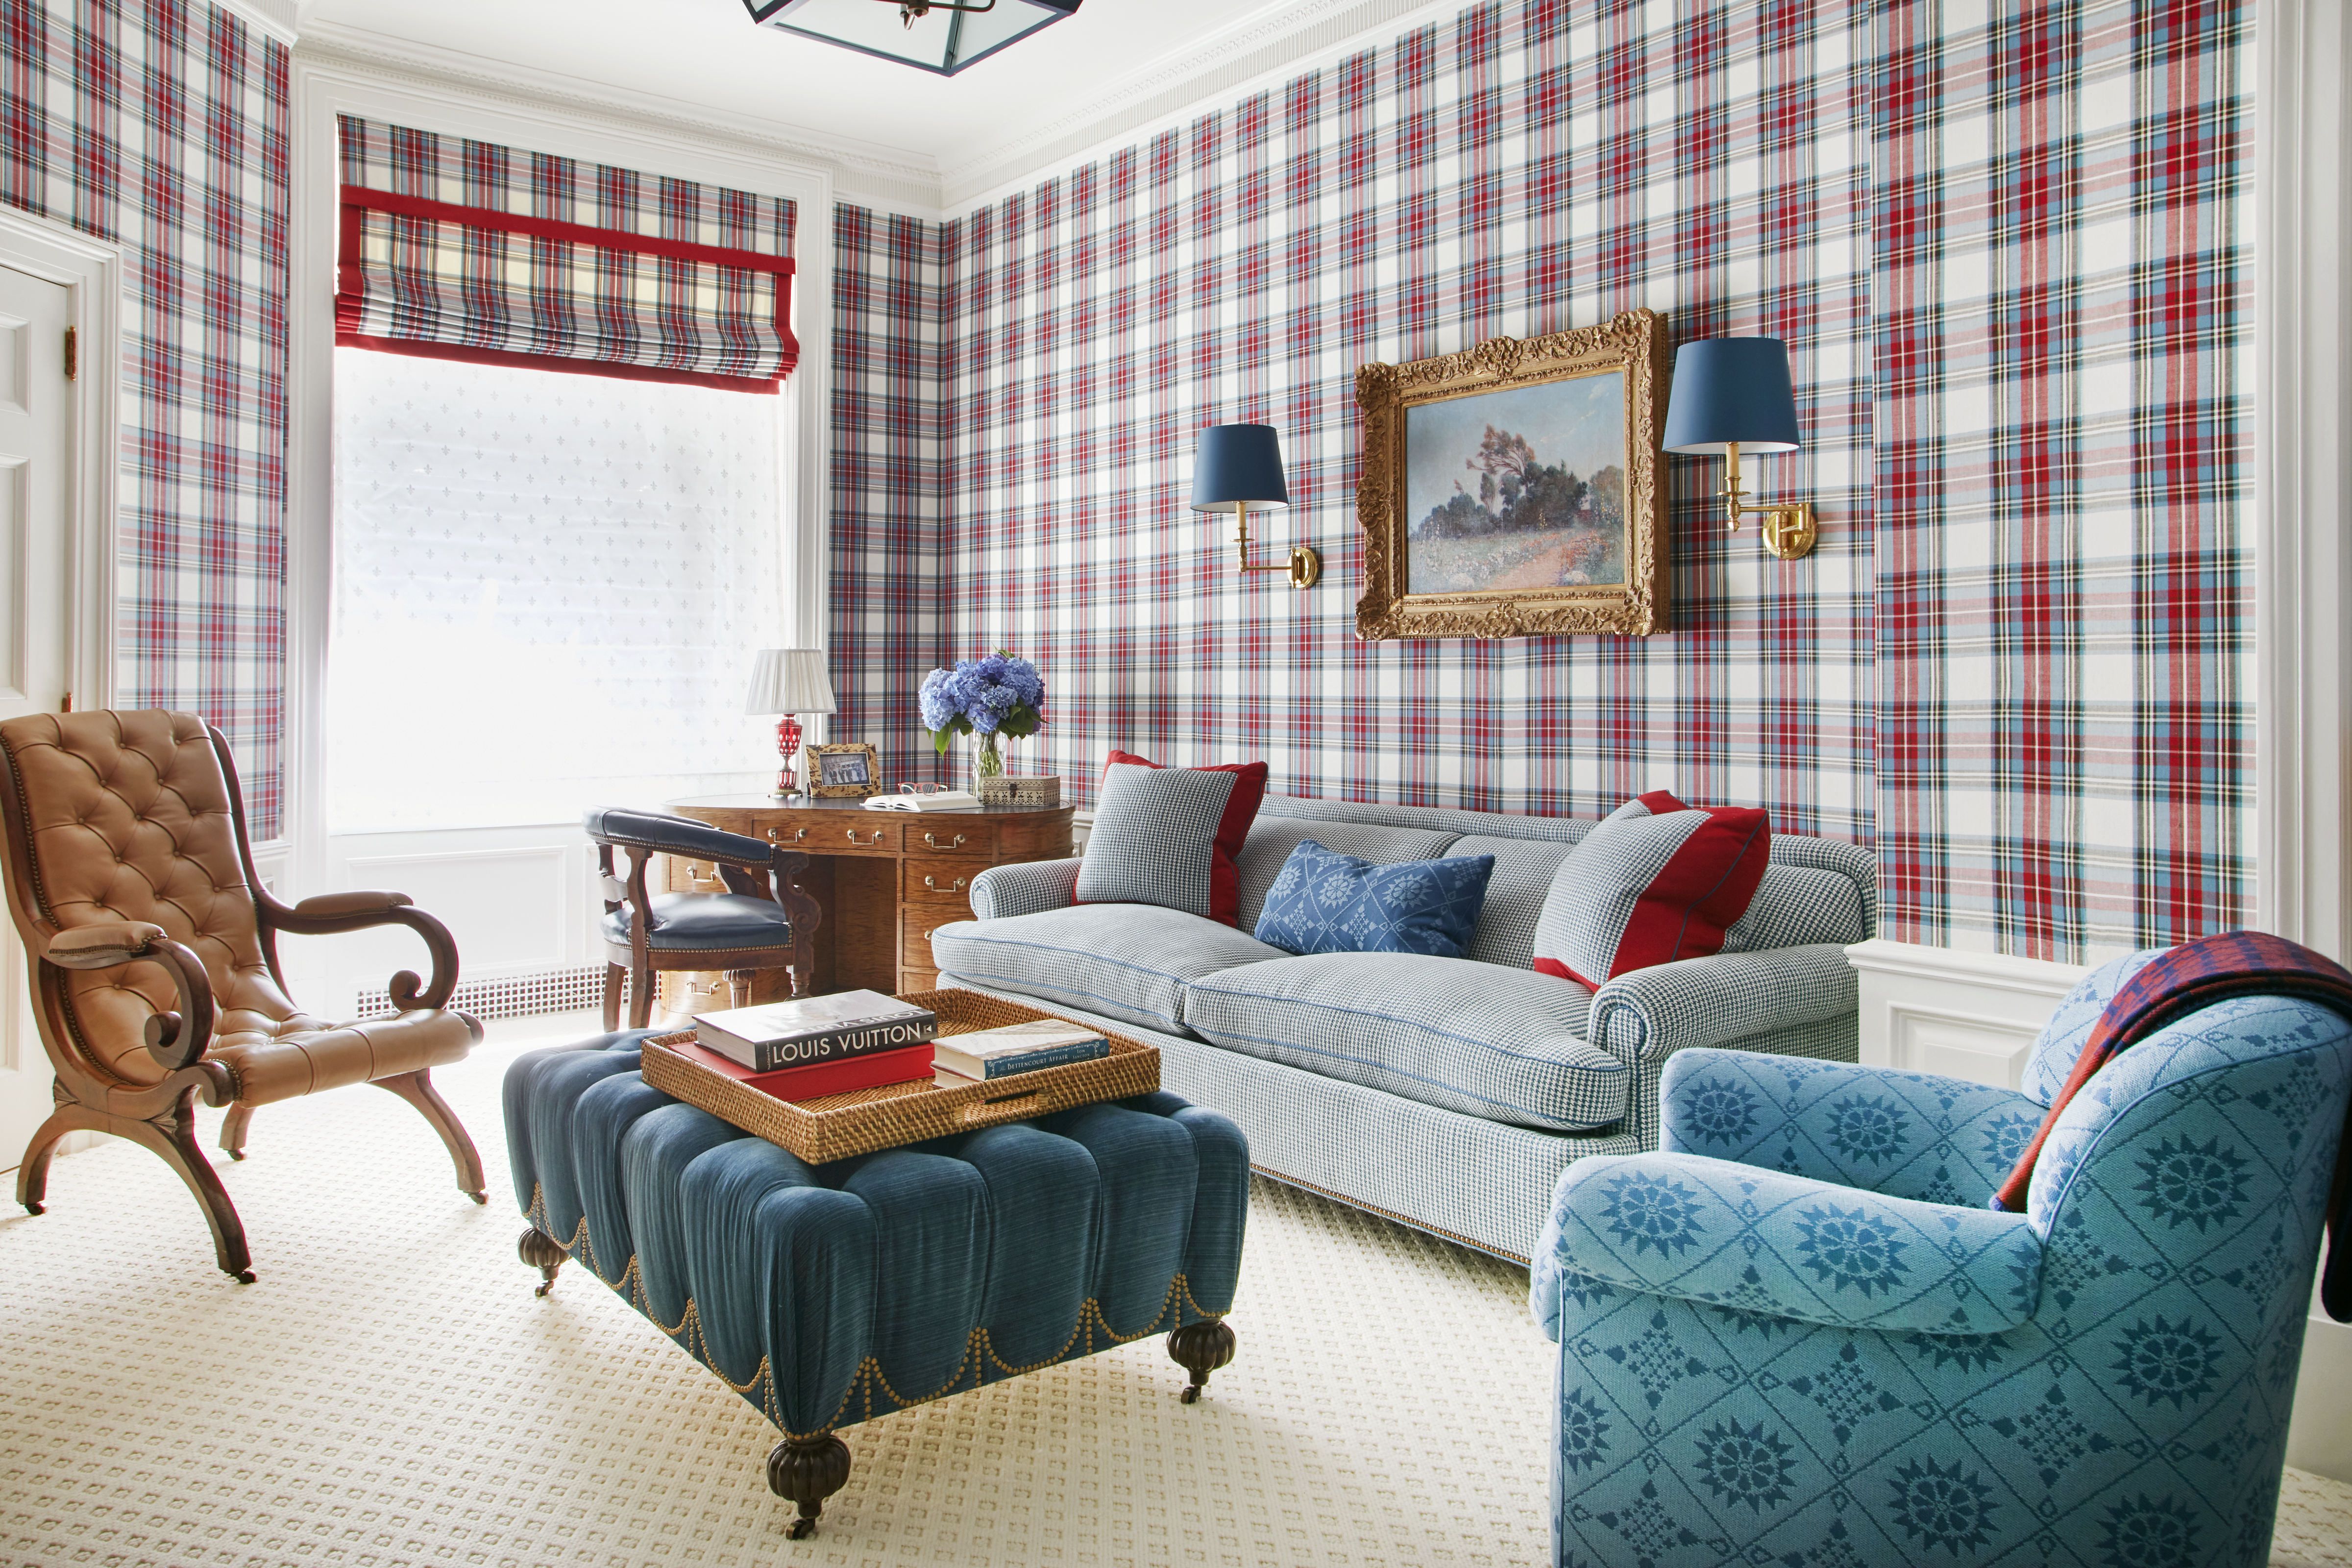 a beaming desk is dressed in a lee jofa tartan pattern recolored especially for this room and the armchair upholstery is inspired by an antique american weave and the leather chair is antique english